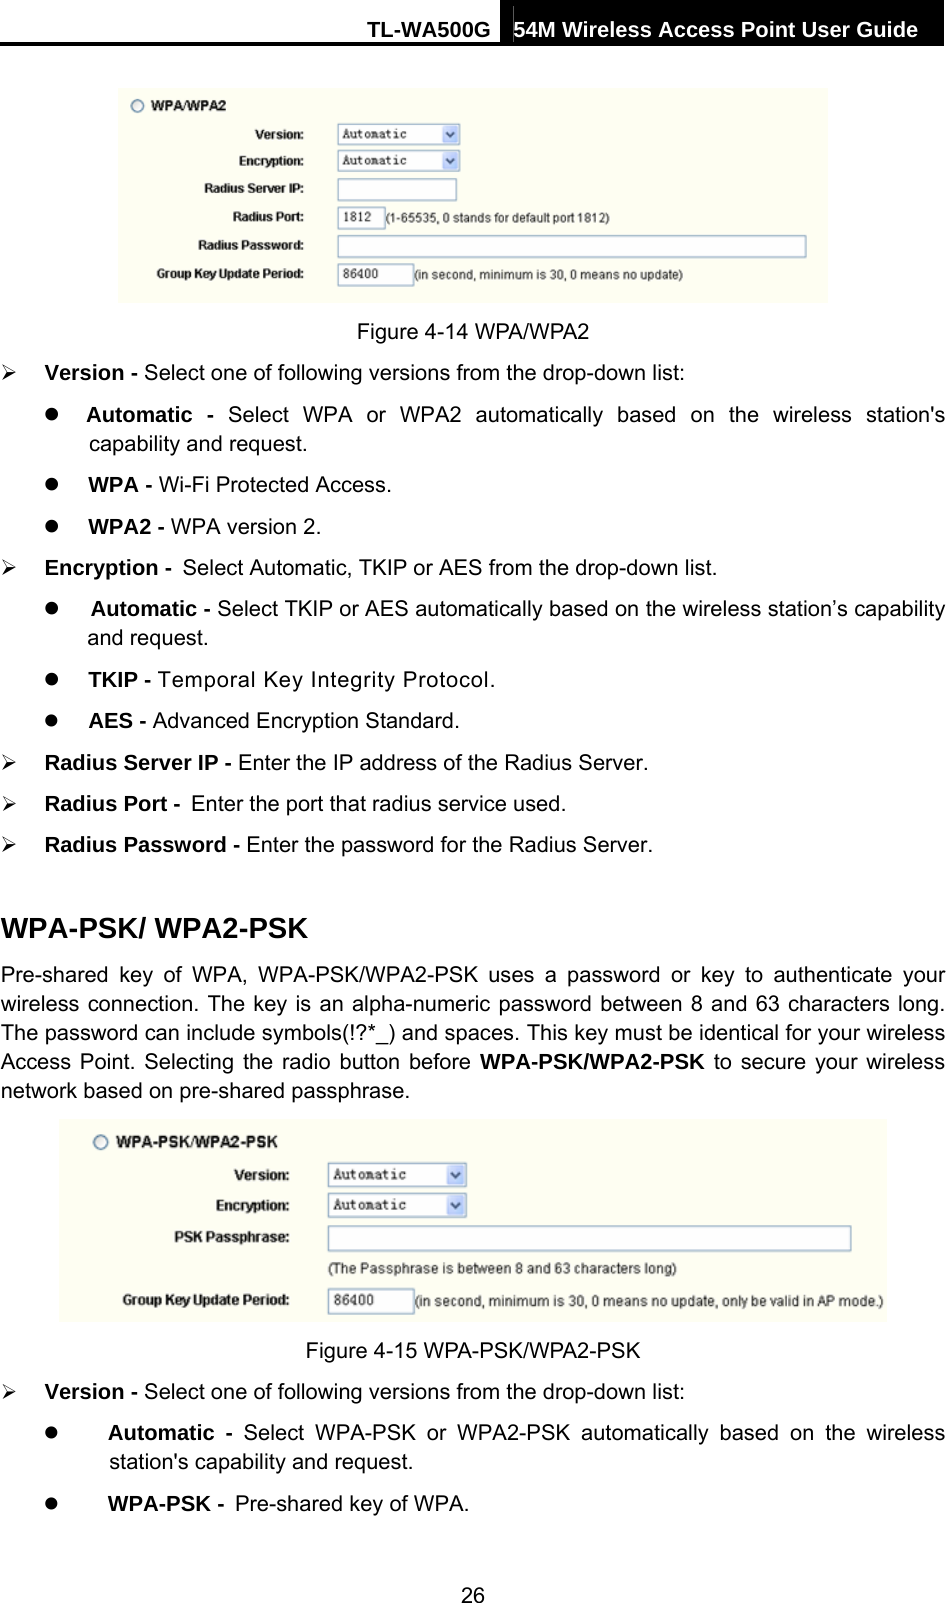 TL-WA500G 54M Wireless Access Point User Guide   Figure 4-14 WPA/WPA2 ¾ Version - Select one of following versions from the drop-down list: z Automatic - Select WPA or WPA2 automatically based on the wireless station&apos;s capability and request.   z WPA - Wi-Fi Protected Access.   z WPA2 - WPA version 2.   ¾ Encryption - Select Automatic, TKIP or AES from the drop-down list. z Automatic - Select TKIP or AES automatically based on the wireless station’s capability and request. z TKIP - Temporal Key Integrity Protocol. z AES - Advanced Encryption Standard. ¾ Radius Server IP - Enter the IP address of the Radius Server. ¾ Radius Port - Enter the port that radius service used. ¾ Radius Password - Enter the password for the Radius Server. WPA-PSK/ WPA2-PSK Pre-shared key of WPA, WPA-PSK/WPA2-PSK uses a password or key to authenticate your wireless connection. The key is an alpha-numeric password between 8 and 63 characters long. The password can include symbols(!?*_) and spaces. This key must be identical for your wireless Access Point. Selecting the radio button before WPA-PSK/WPA2-PSK to secure your wireless network based on pre-shared passphrase.  Figure 4-15 WPA-PSK/WPA2-PSK ¾ Version - Select one of following versions from the drop-down list: z Automatic - Select WPA-PSK or WPA2-PSK automatically based on the wireless station&apos;s capability and request.   z WPA-PSK - Pre-shared key of WPA.  26 